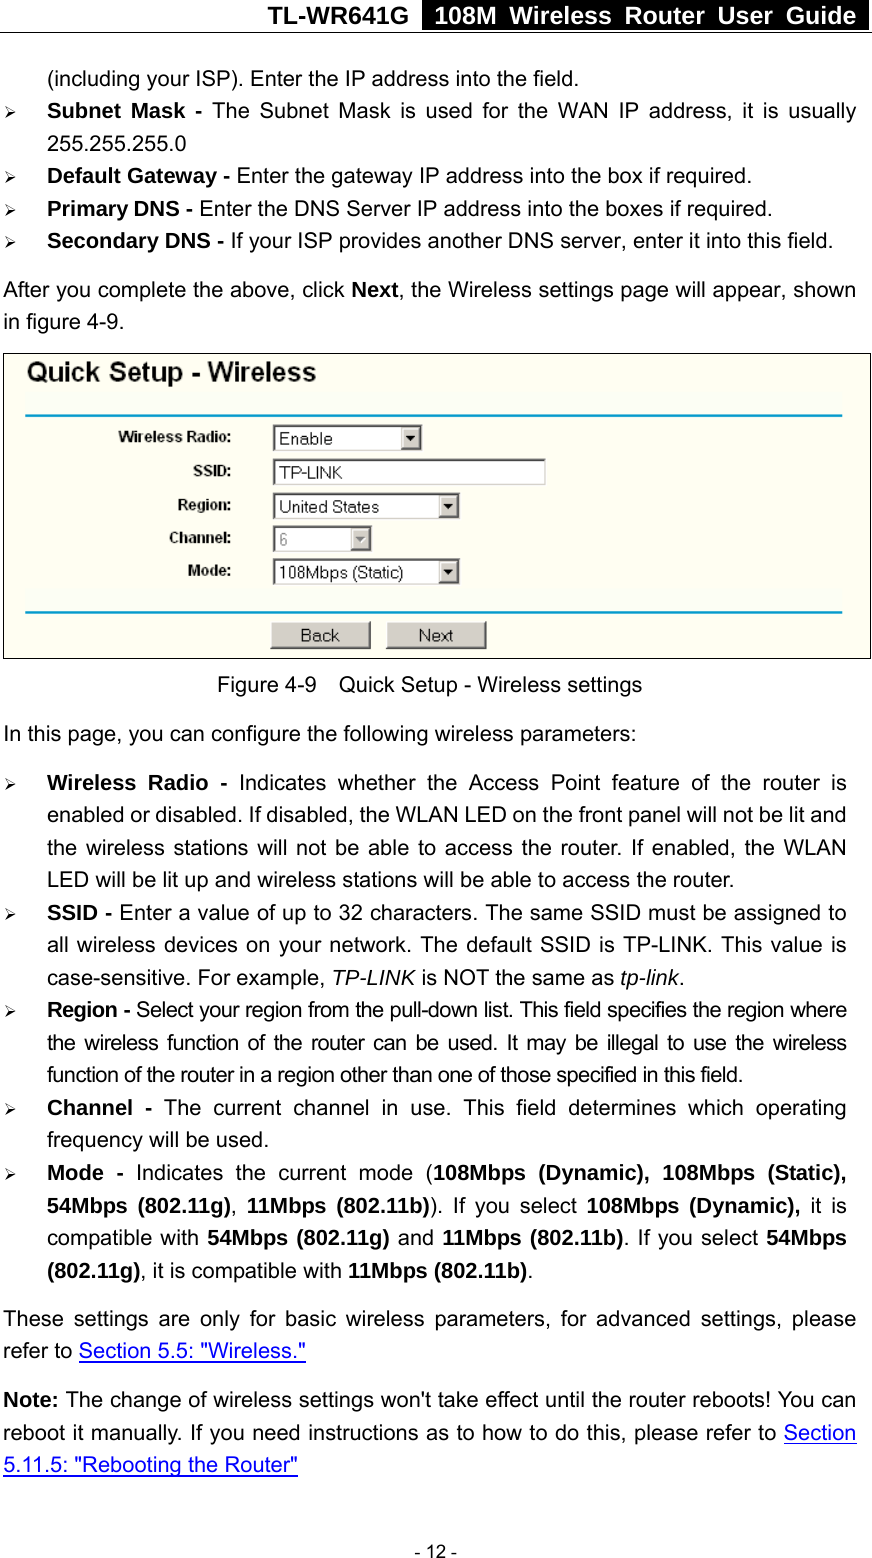 TL-WR641G   108M Wireless Router User Guide  (including your ISP). Enter the IP address into the field. ¾ Subnet Mask - The Subnet Mask is used for the WAN IP address, it is usually 255.255.255.0 ¾ Default Gateway - Enter the gateway IP address into the box if required. ¾ Primary DNS - Enter the DNS Server IP address into the boxes if required. ¾ Secondary DNS - If your ISP provides another DNS server, enter it into this field. After you complete the above, click Next, the Wireless settings page will appear, shown in figure 4-9.  Figure 4-9    Quick Setup - Wireless settings In this page, you can configure the following wireless parameters: ¾ Wireless Radio - Indicates whether the Access Point feature of the router is enabled or disabled. If disabled, the WLAN LED on the front panel will not be lit and the wireless stations will not be able to access the router. If enabled, the WLAN LED will be lit up and wireless stations will be able to access the router. ¾ SSID - Enter a value of up to 32 characters. The same SSID must be assigned to all wireless devices on your network. The default SSID is TP-LINK. This value is case-sensitive. For example, TP-LINK is NOT the same as tp-link. ¾ Region - Select your region from the pull-down list. This field specifies the region where the wireless function of the router can be used. It may be illegal to use the wireless function of the router in a region other than one of those specified in this field. ¾ Channel - The current channel in use. This field determines which operating frequency will be used. ¾ Mode - Indicates the current mode (108Mbps (Dynamic), 108Mbps (Static), 54Mbps (802.11g),  11Mbps (802.11b)). If you select 108Mbps (Dynamic), it is compatible with 54Mbps (802.11g) and 11Mbps (802.11b). If you select 54Mbps (802.11g), it is compatible with 11Mbps (802.11b). These settings are only for basic wireless parameters, for advanced settings, please refer to Section 5.5: &quot;Wireless.&quot;  Note: The change of wireless settings won&apos;t take effect until the router reboots! You can reboot it manually. If you need instructions as to how to do this, please refer to Section 5.11.5: &quot;Rebooting the Router&quot; - 12 - 